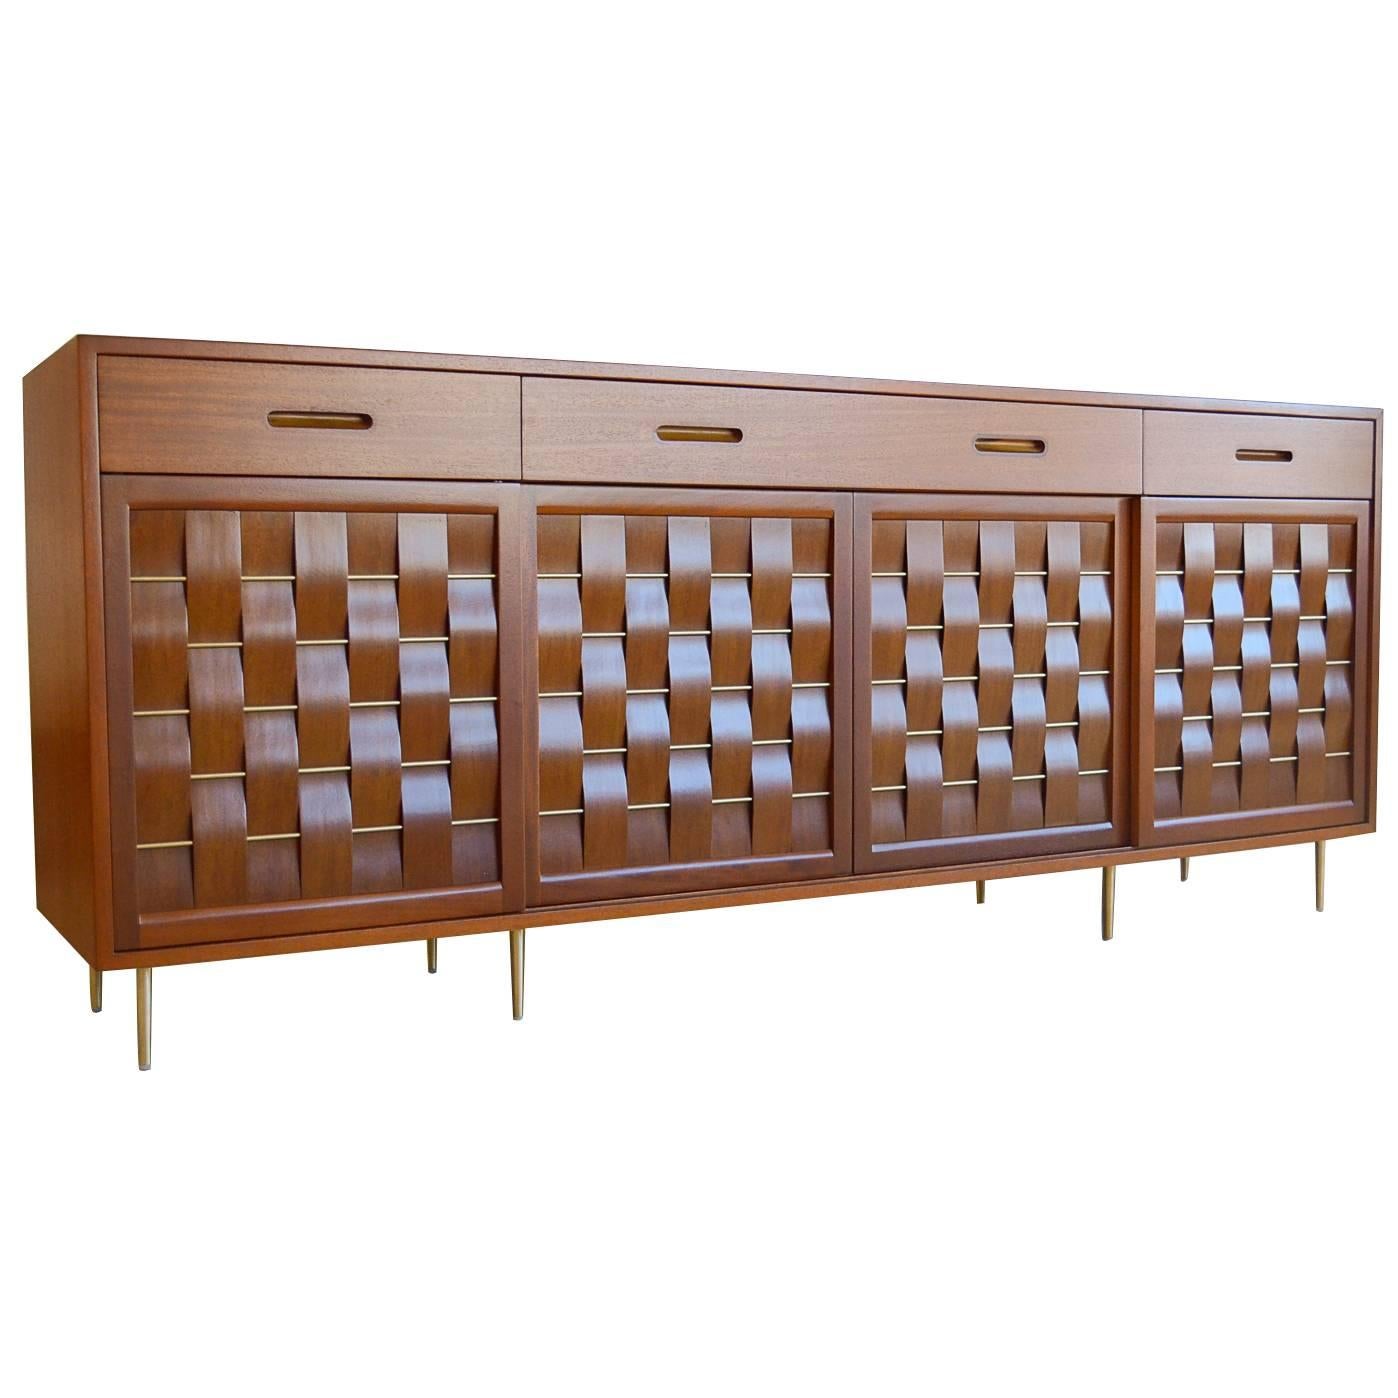 Exceptional Mahogany and Brass Basketweave Credenza by Edward Wormley